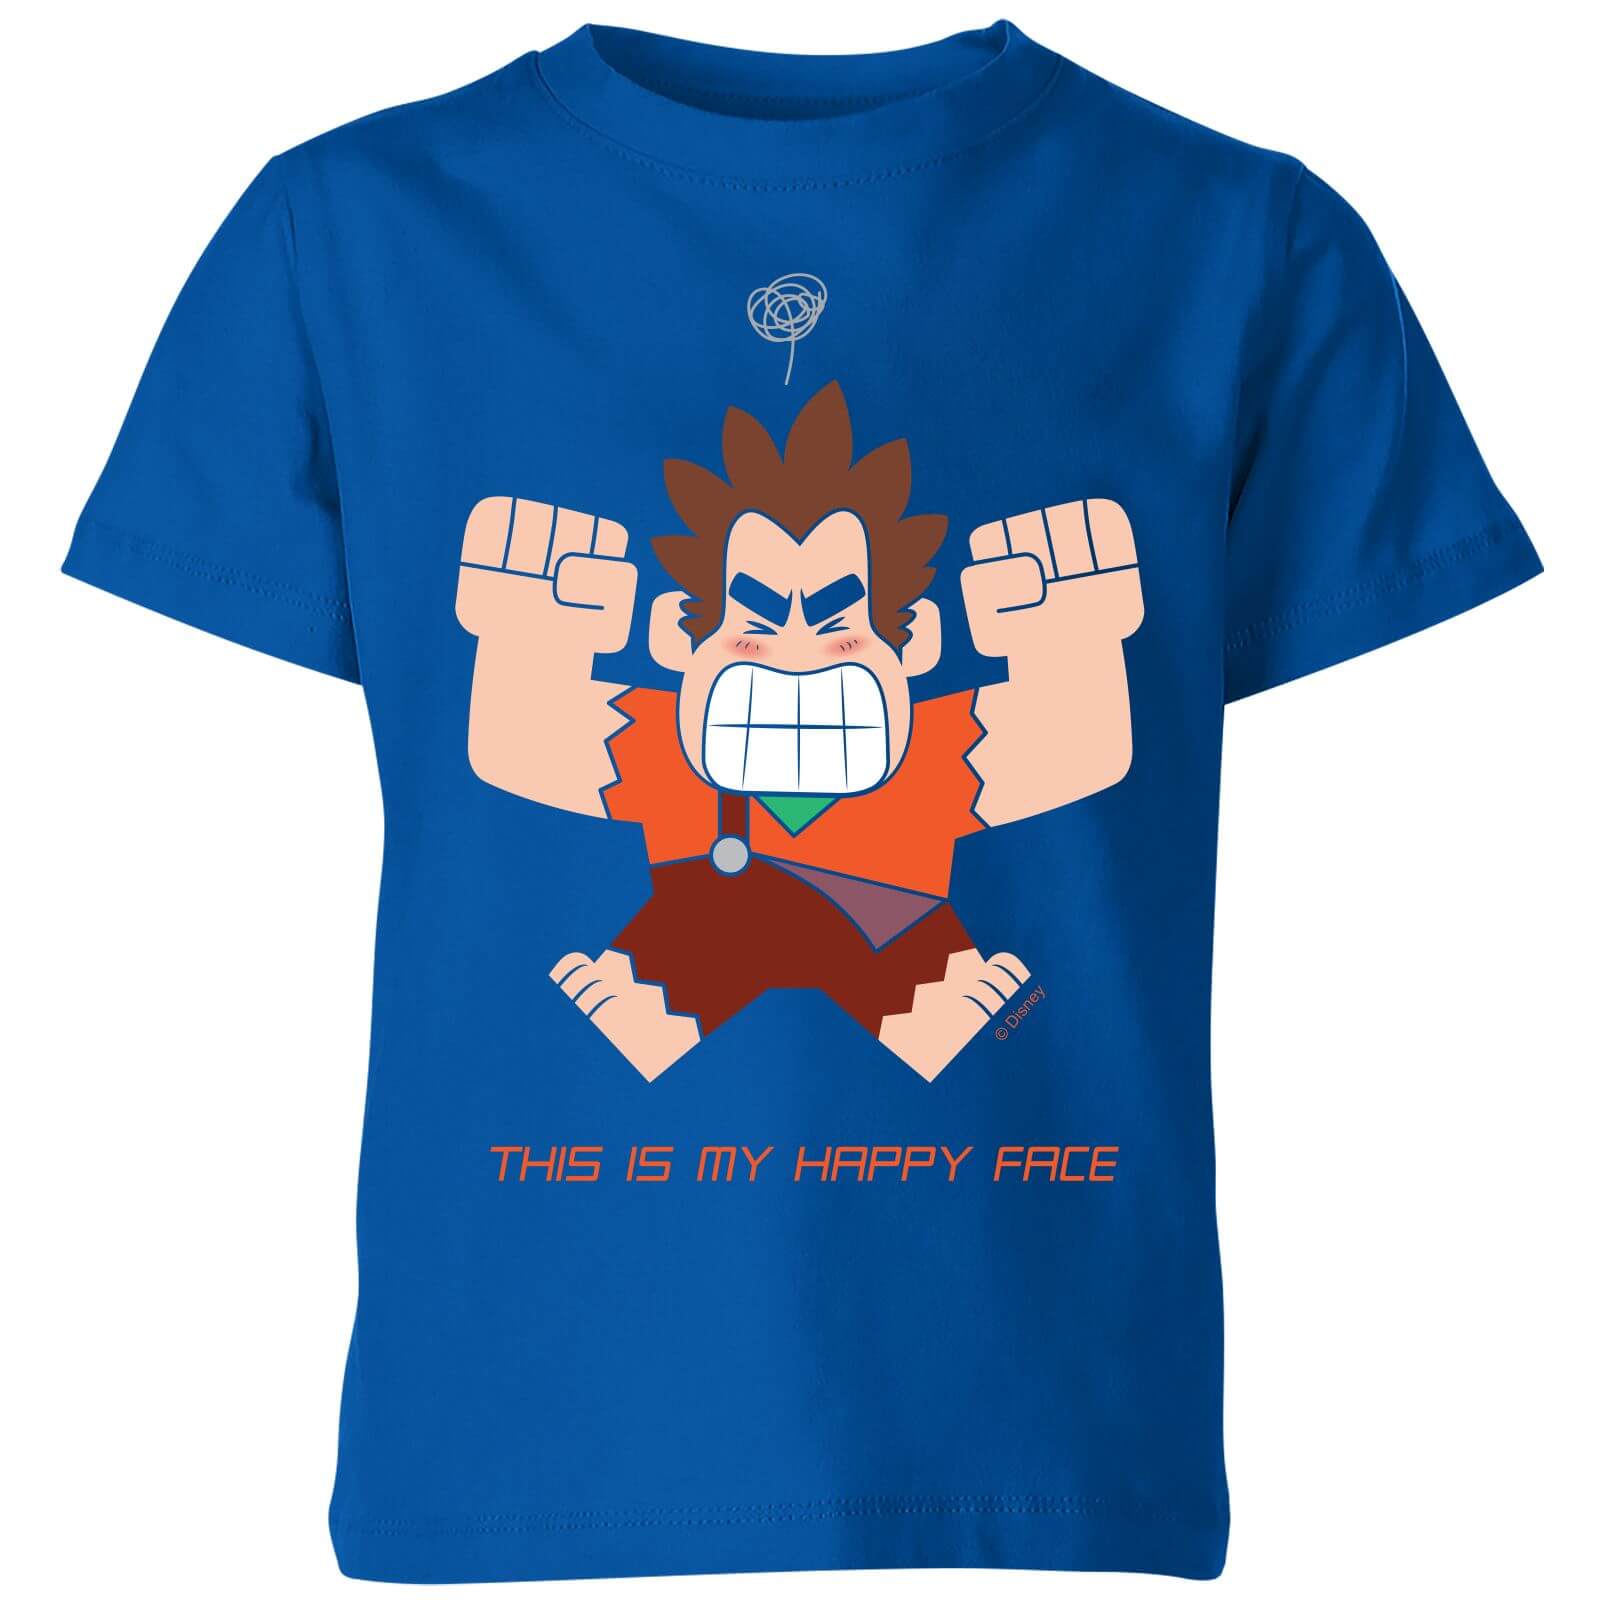 Wreck-it Ralph This Is My Happy Face Kinder T-Shirt - Blau Royal - 11-12 Jahre